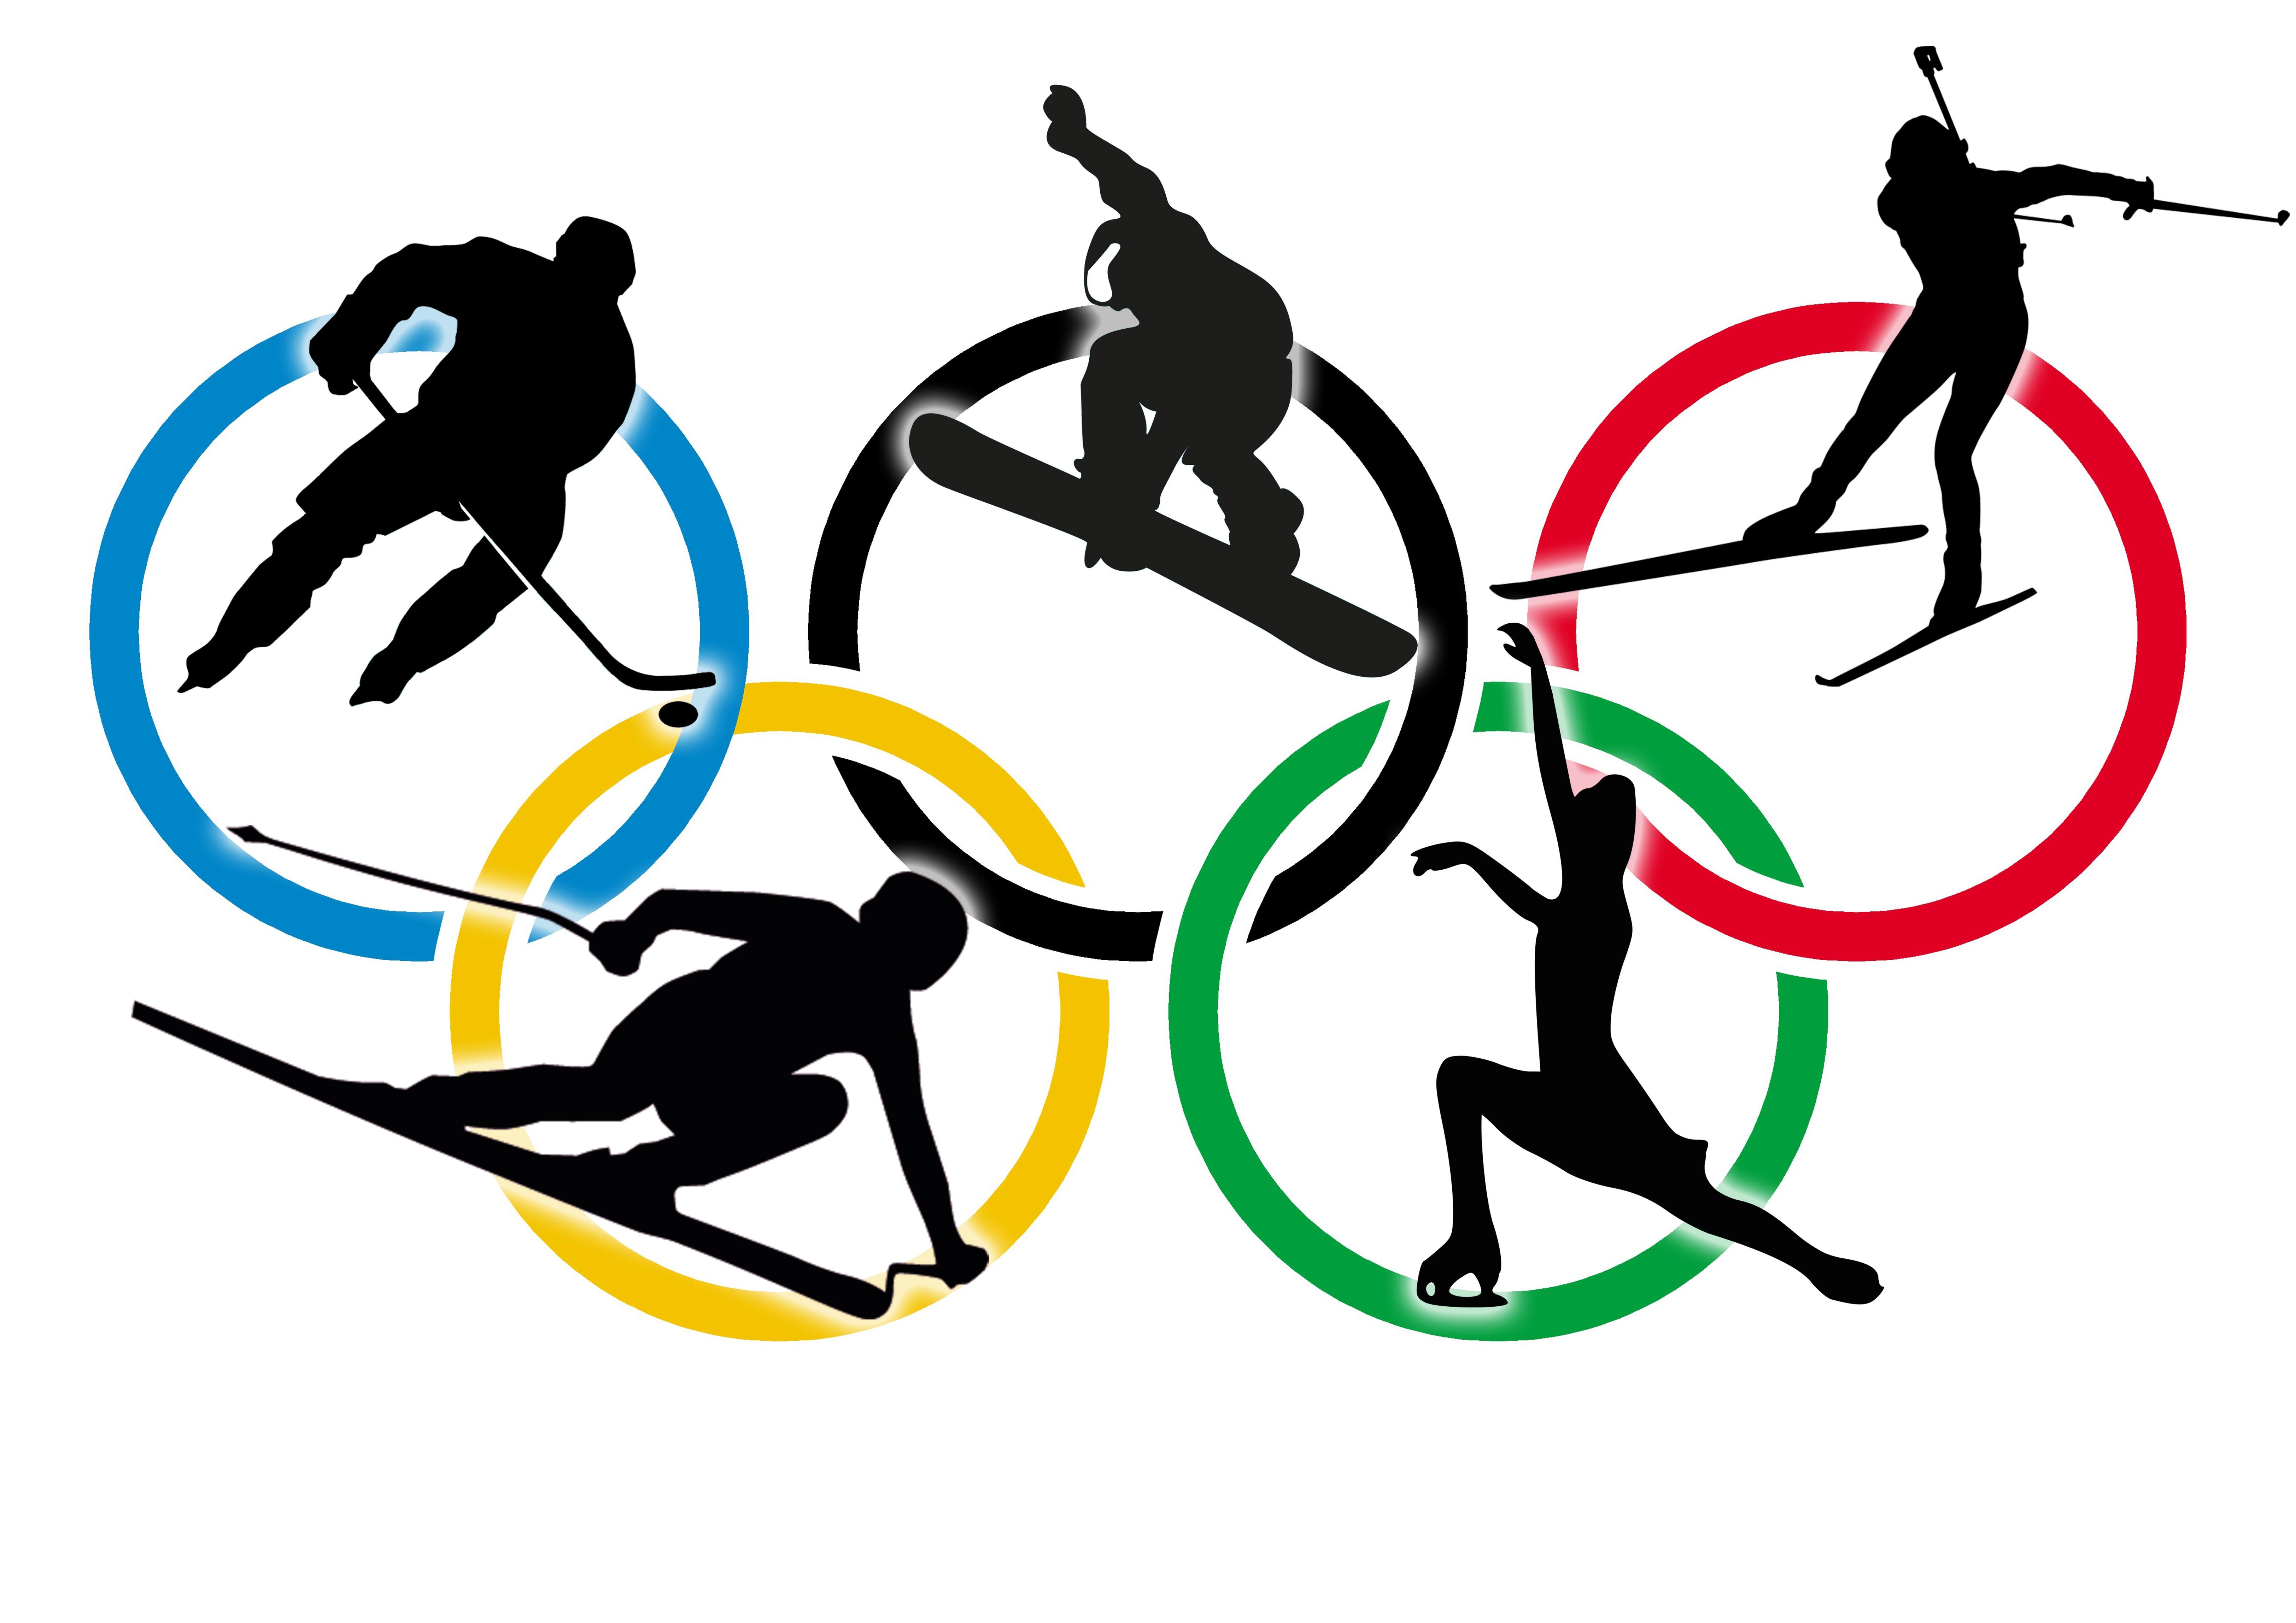 Graphic of 5 Olympic rings, with shadow figures of athletes in each: hockey, snowboarding, ski jumping, downhill skiing, and figure skating